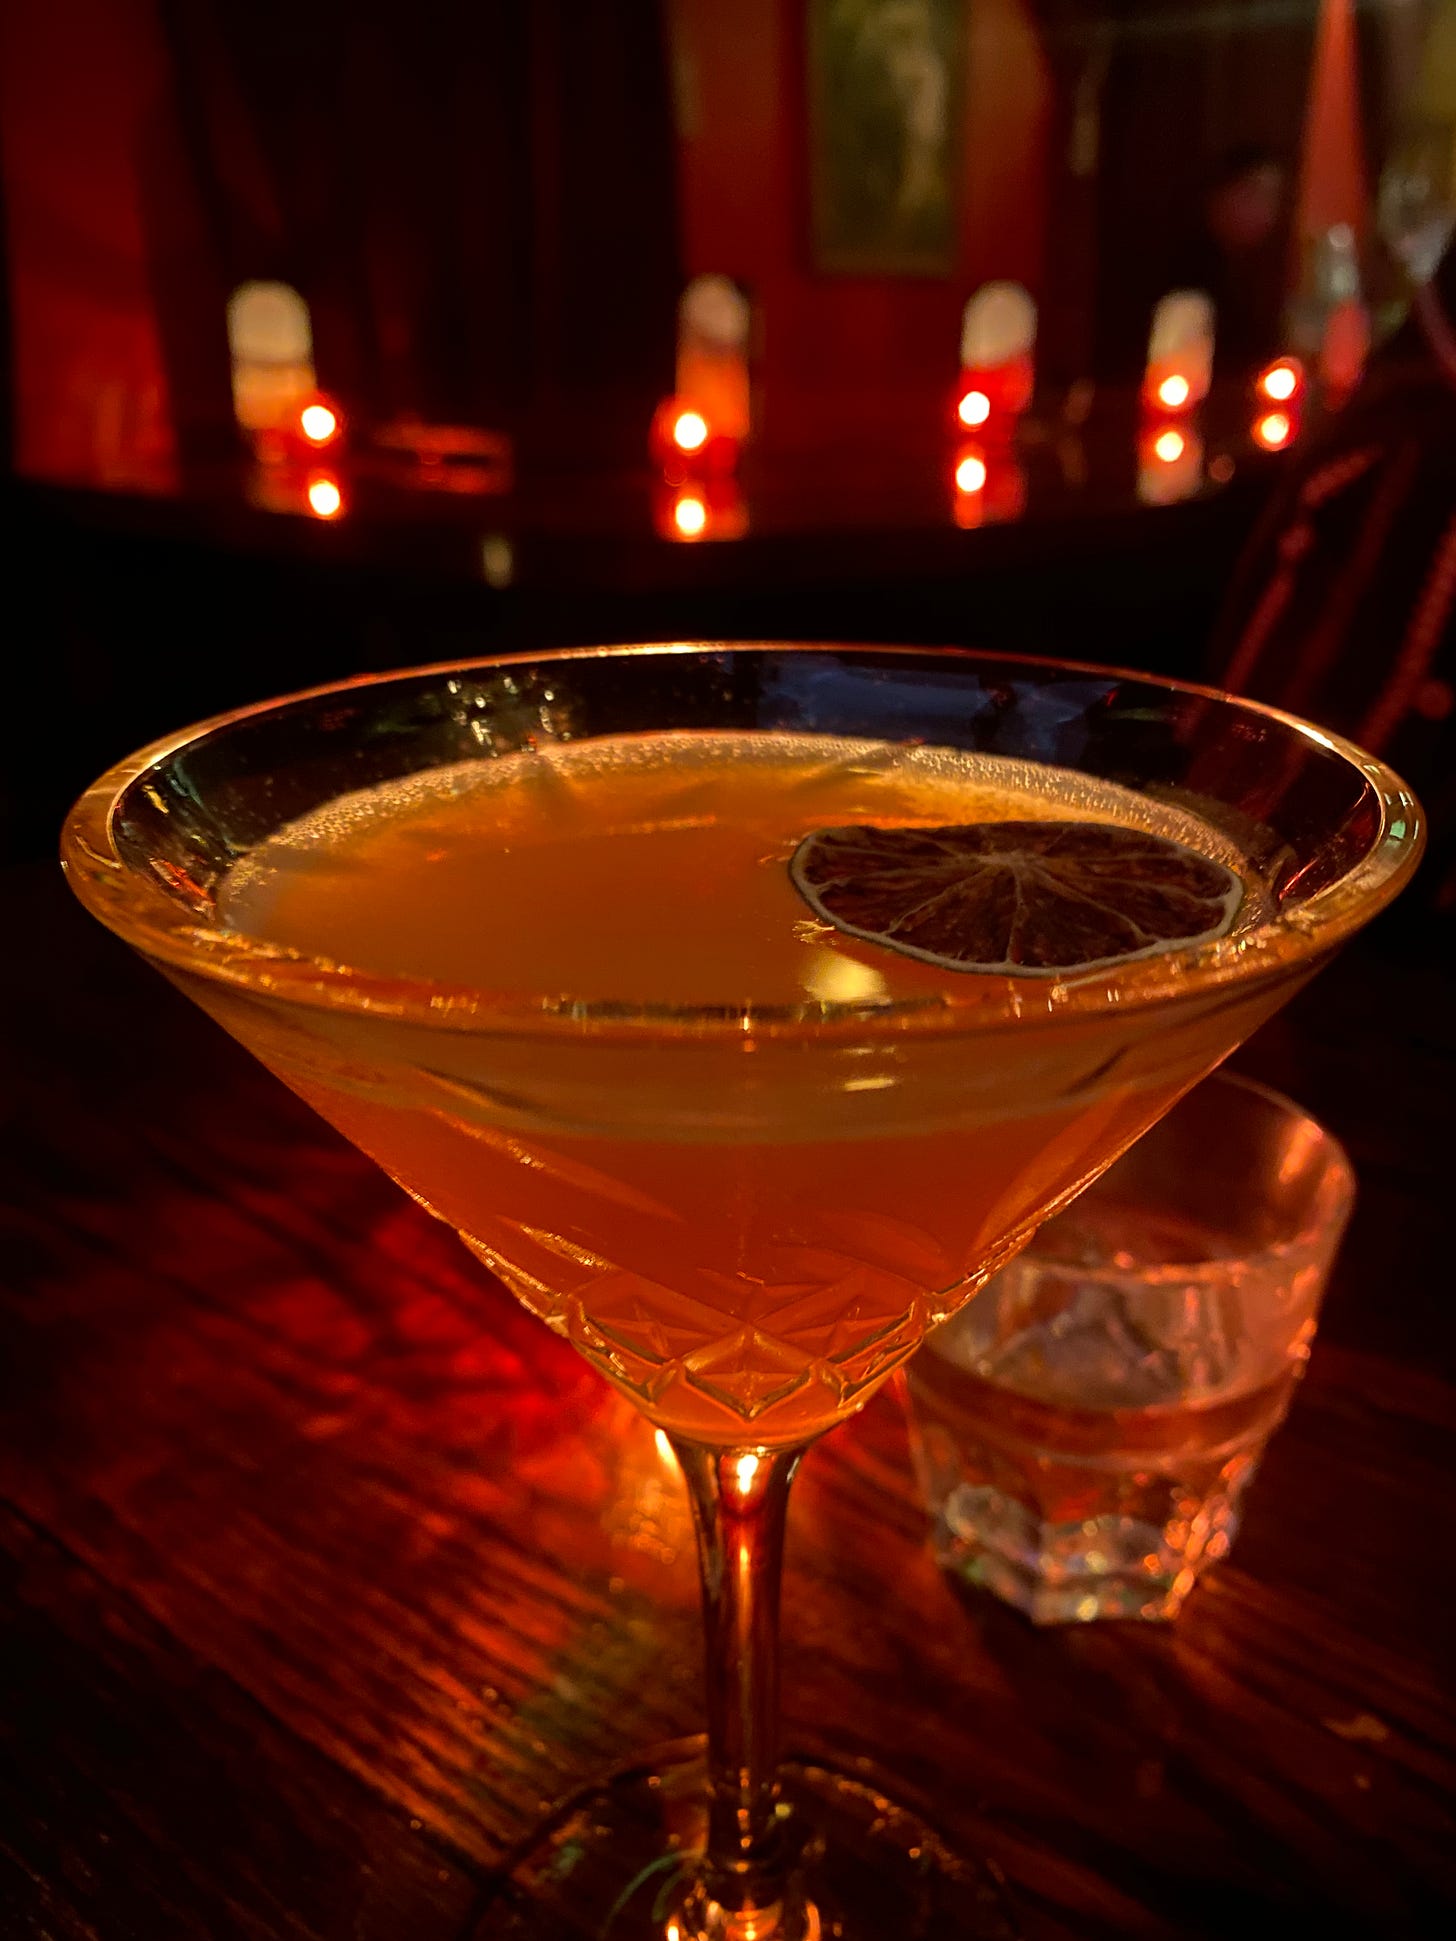 a martini glass with embossed diamond shapes near the stem, filled with an orange-brown drink that has a dried lime slice floating on top. The room in the background is dimly lit by candles, making everything seem red-hued.